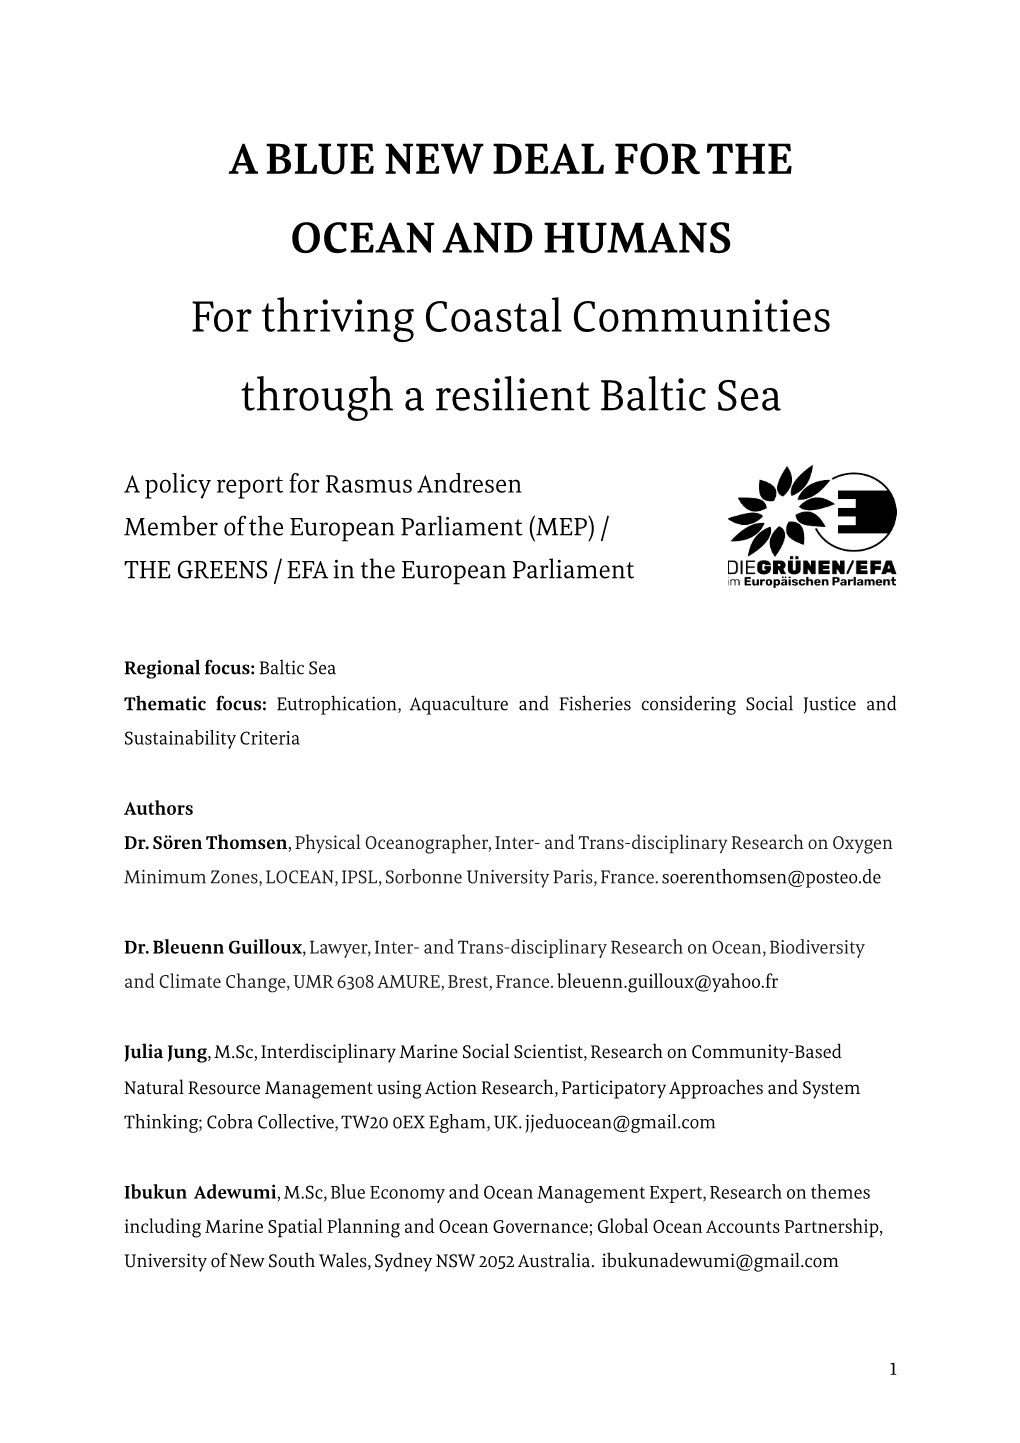 A BLUE NEW DEAL for the OCEAN and HUMANS for Thriving Coastal Communities Through a Resilient Baltic Sea